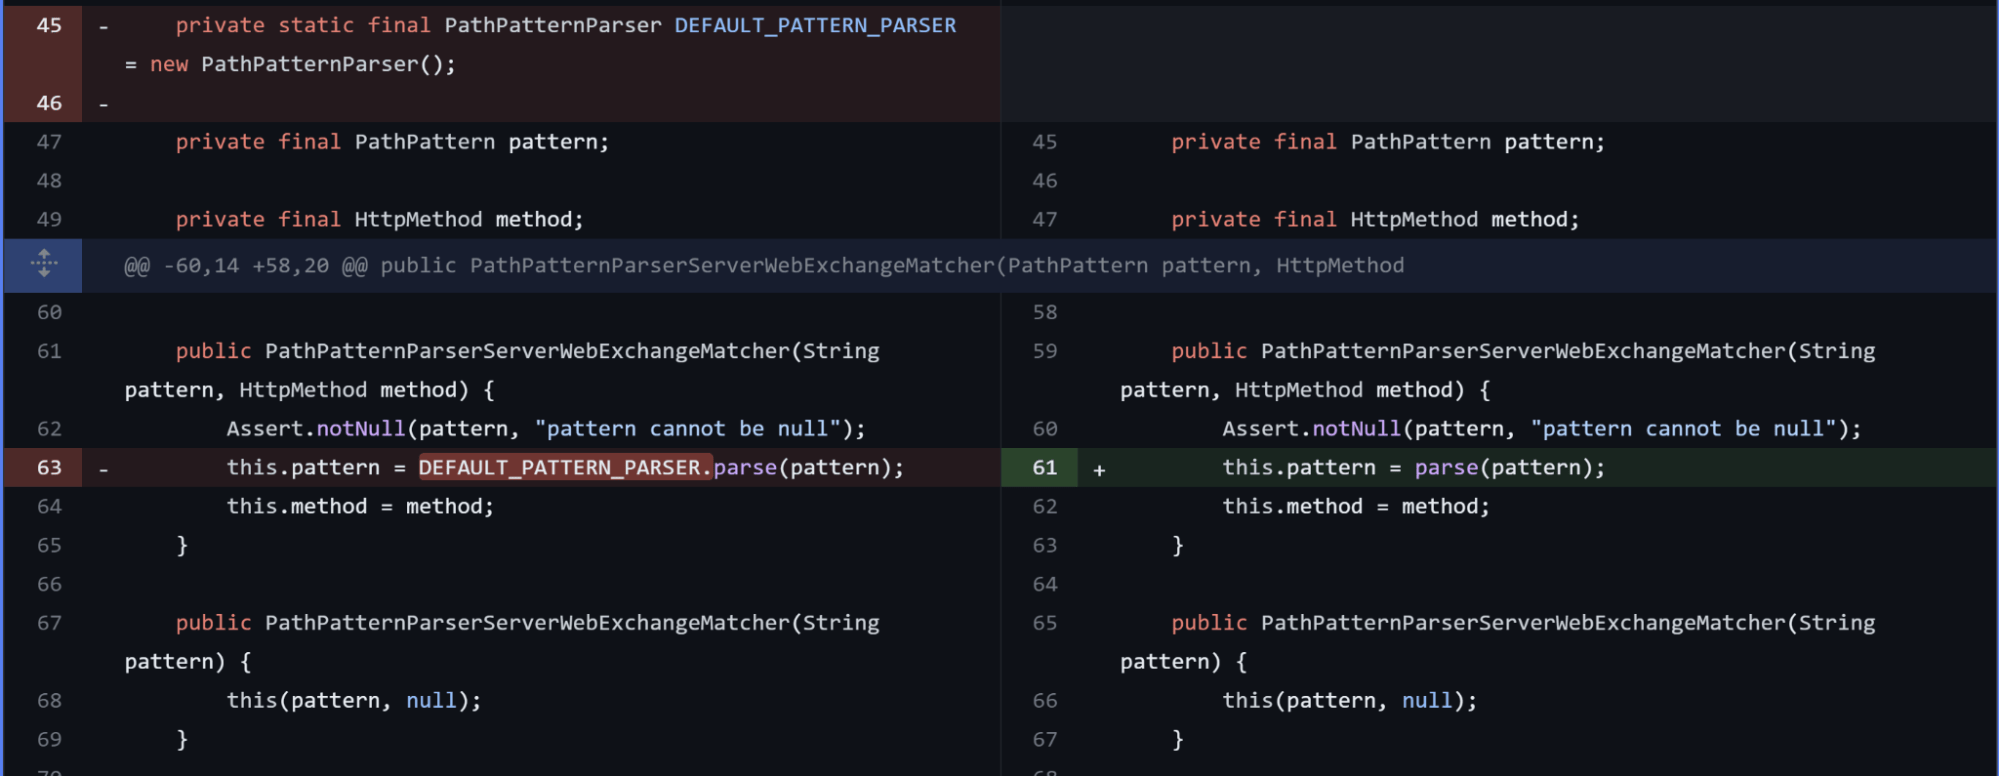 PathPatternParser Source Code